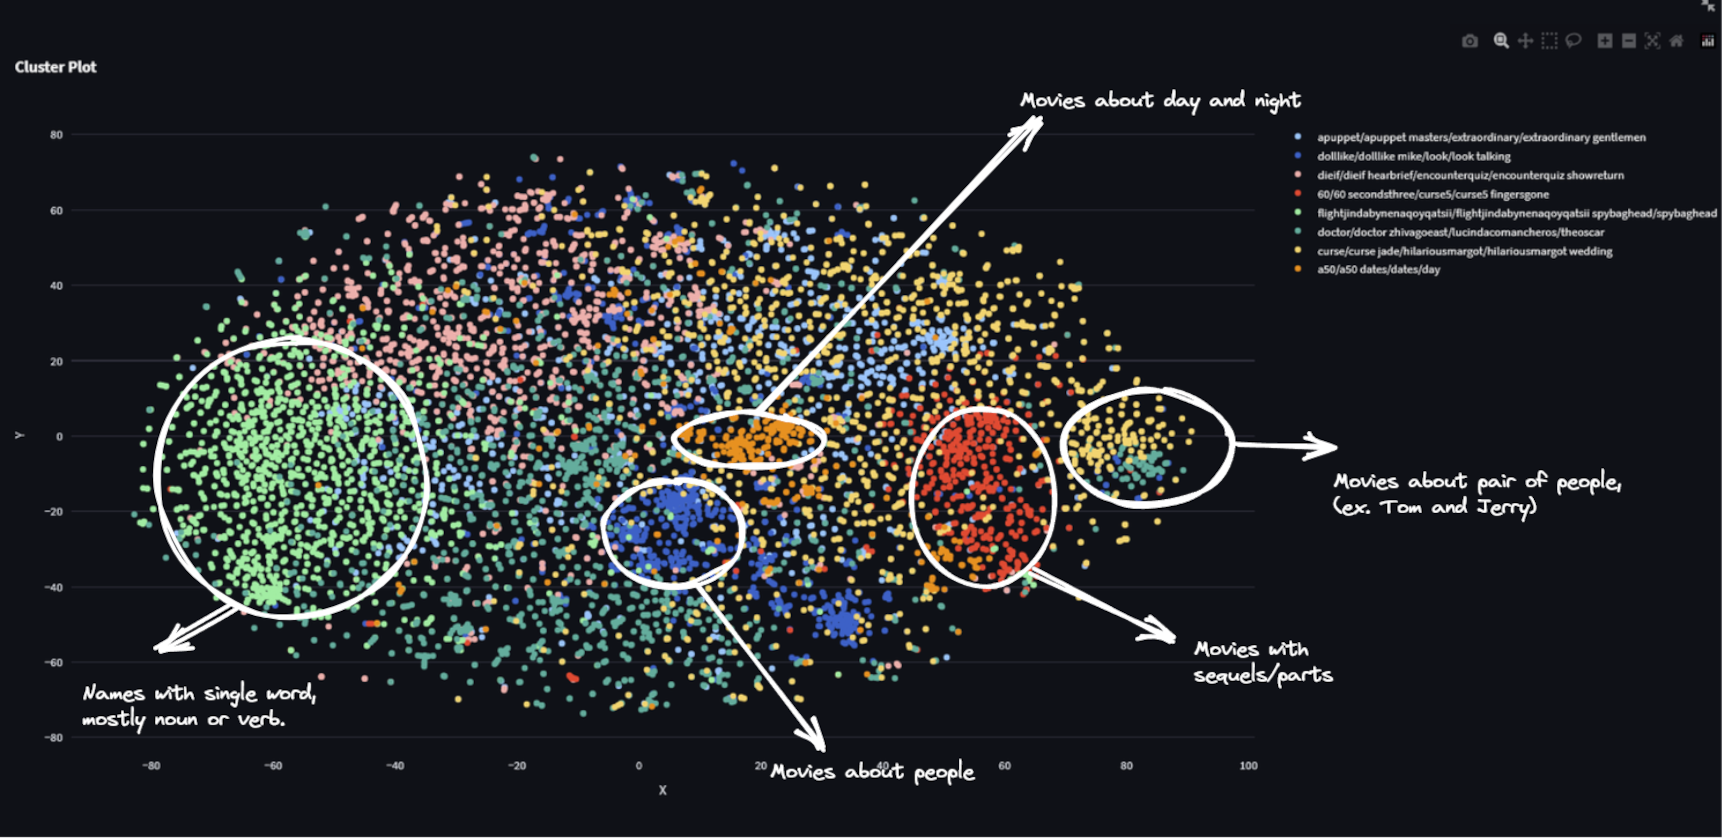 Annotated output created from semantic clustering of movie titles using ClustrLab2k13 